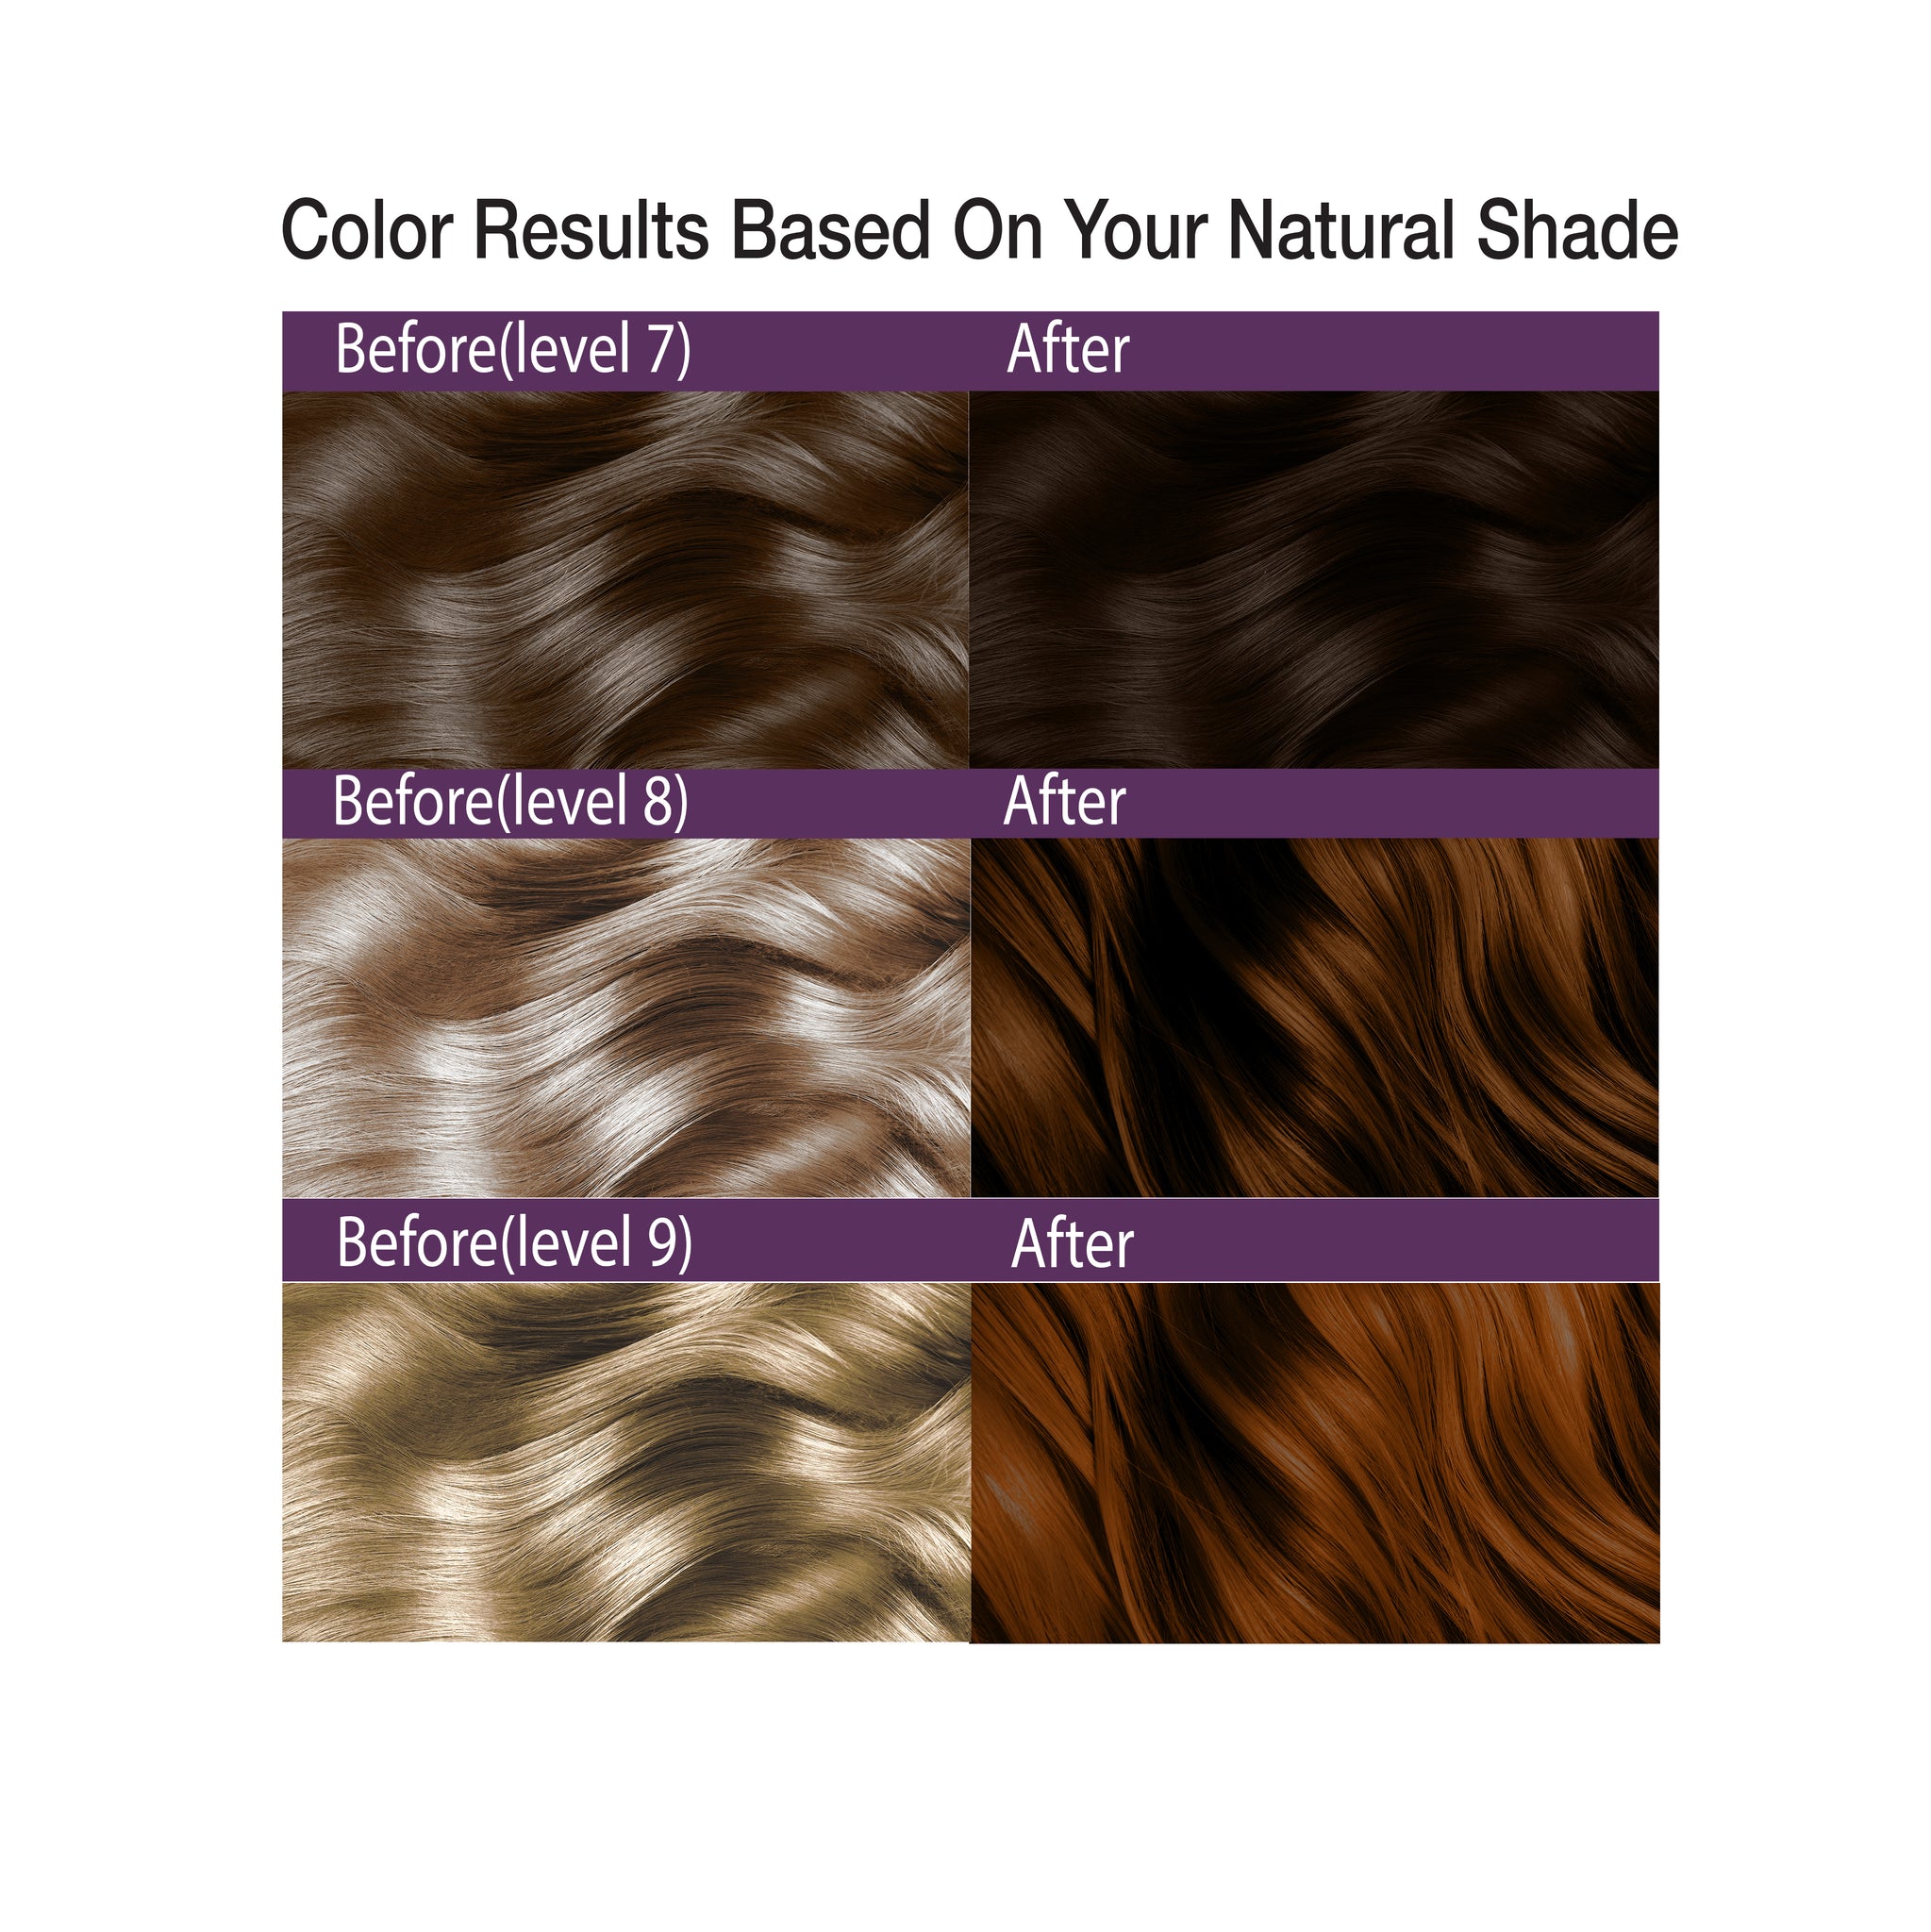 30 Amazing Golden Brown Hair Color Ideas to Inspire Your Makeover